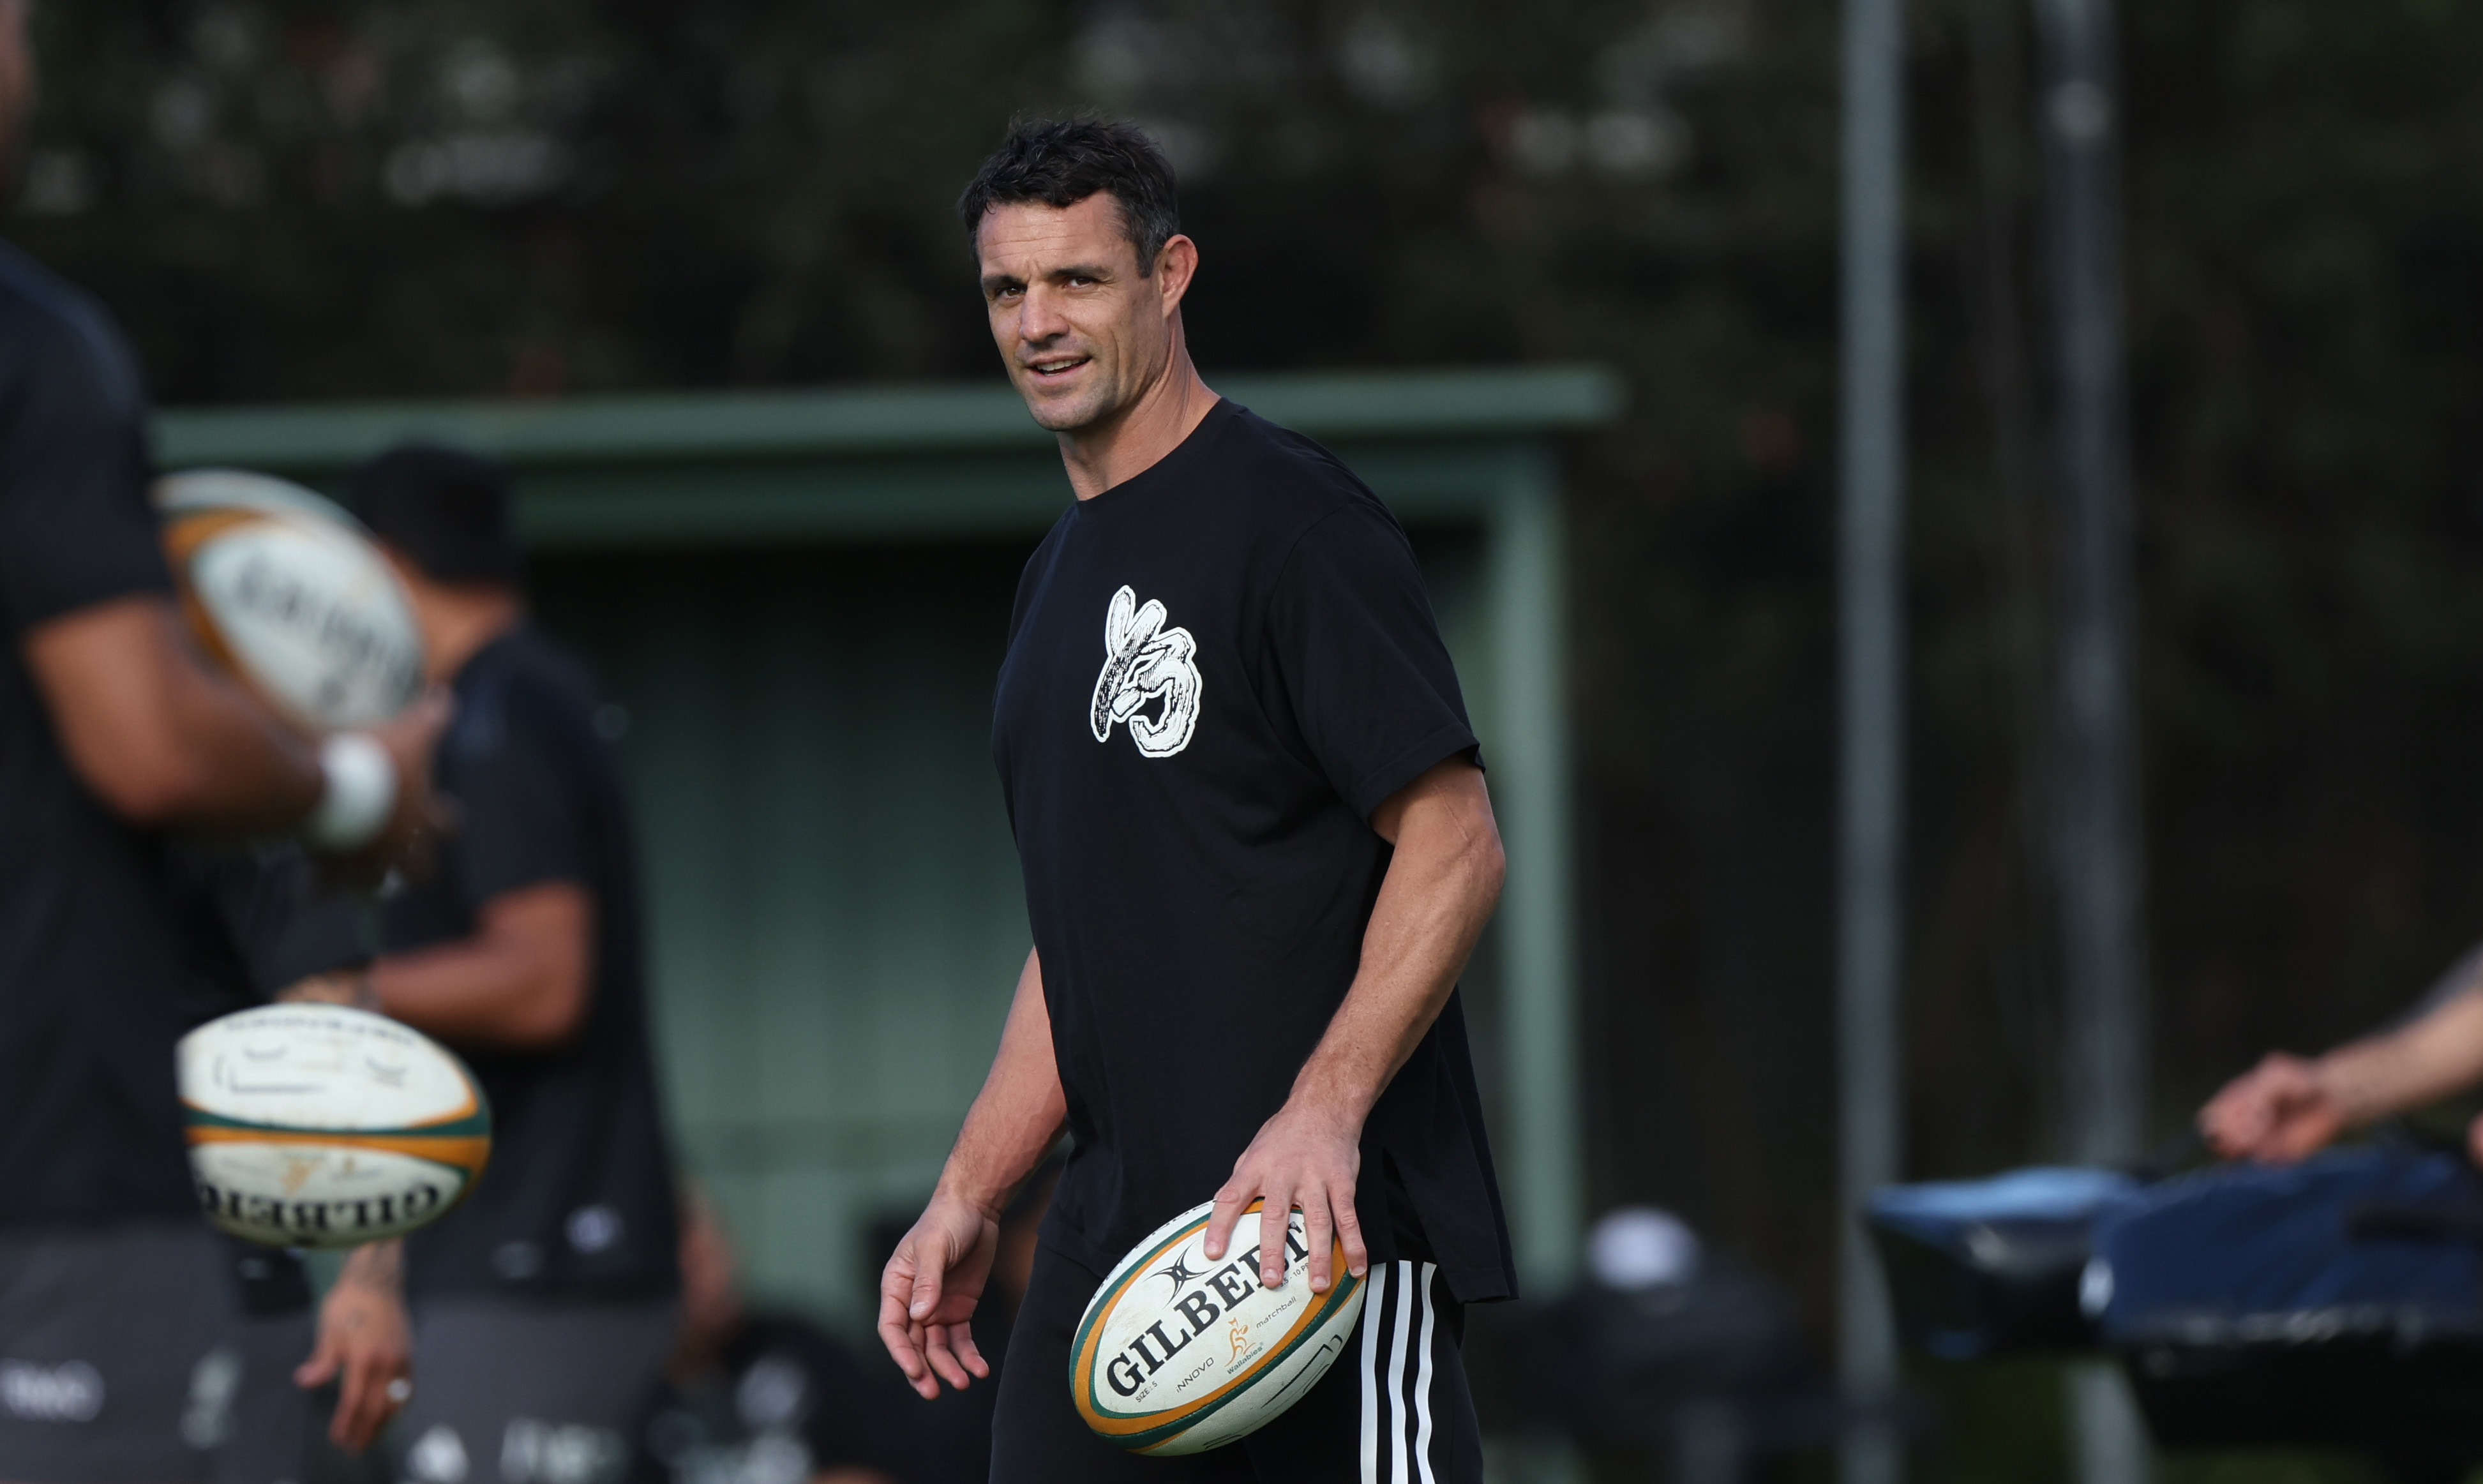 Dan Carter reveals who he rates as the world's best ahead of World